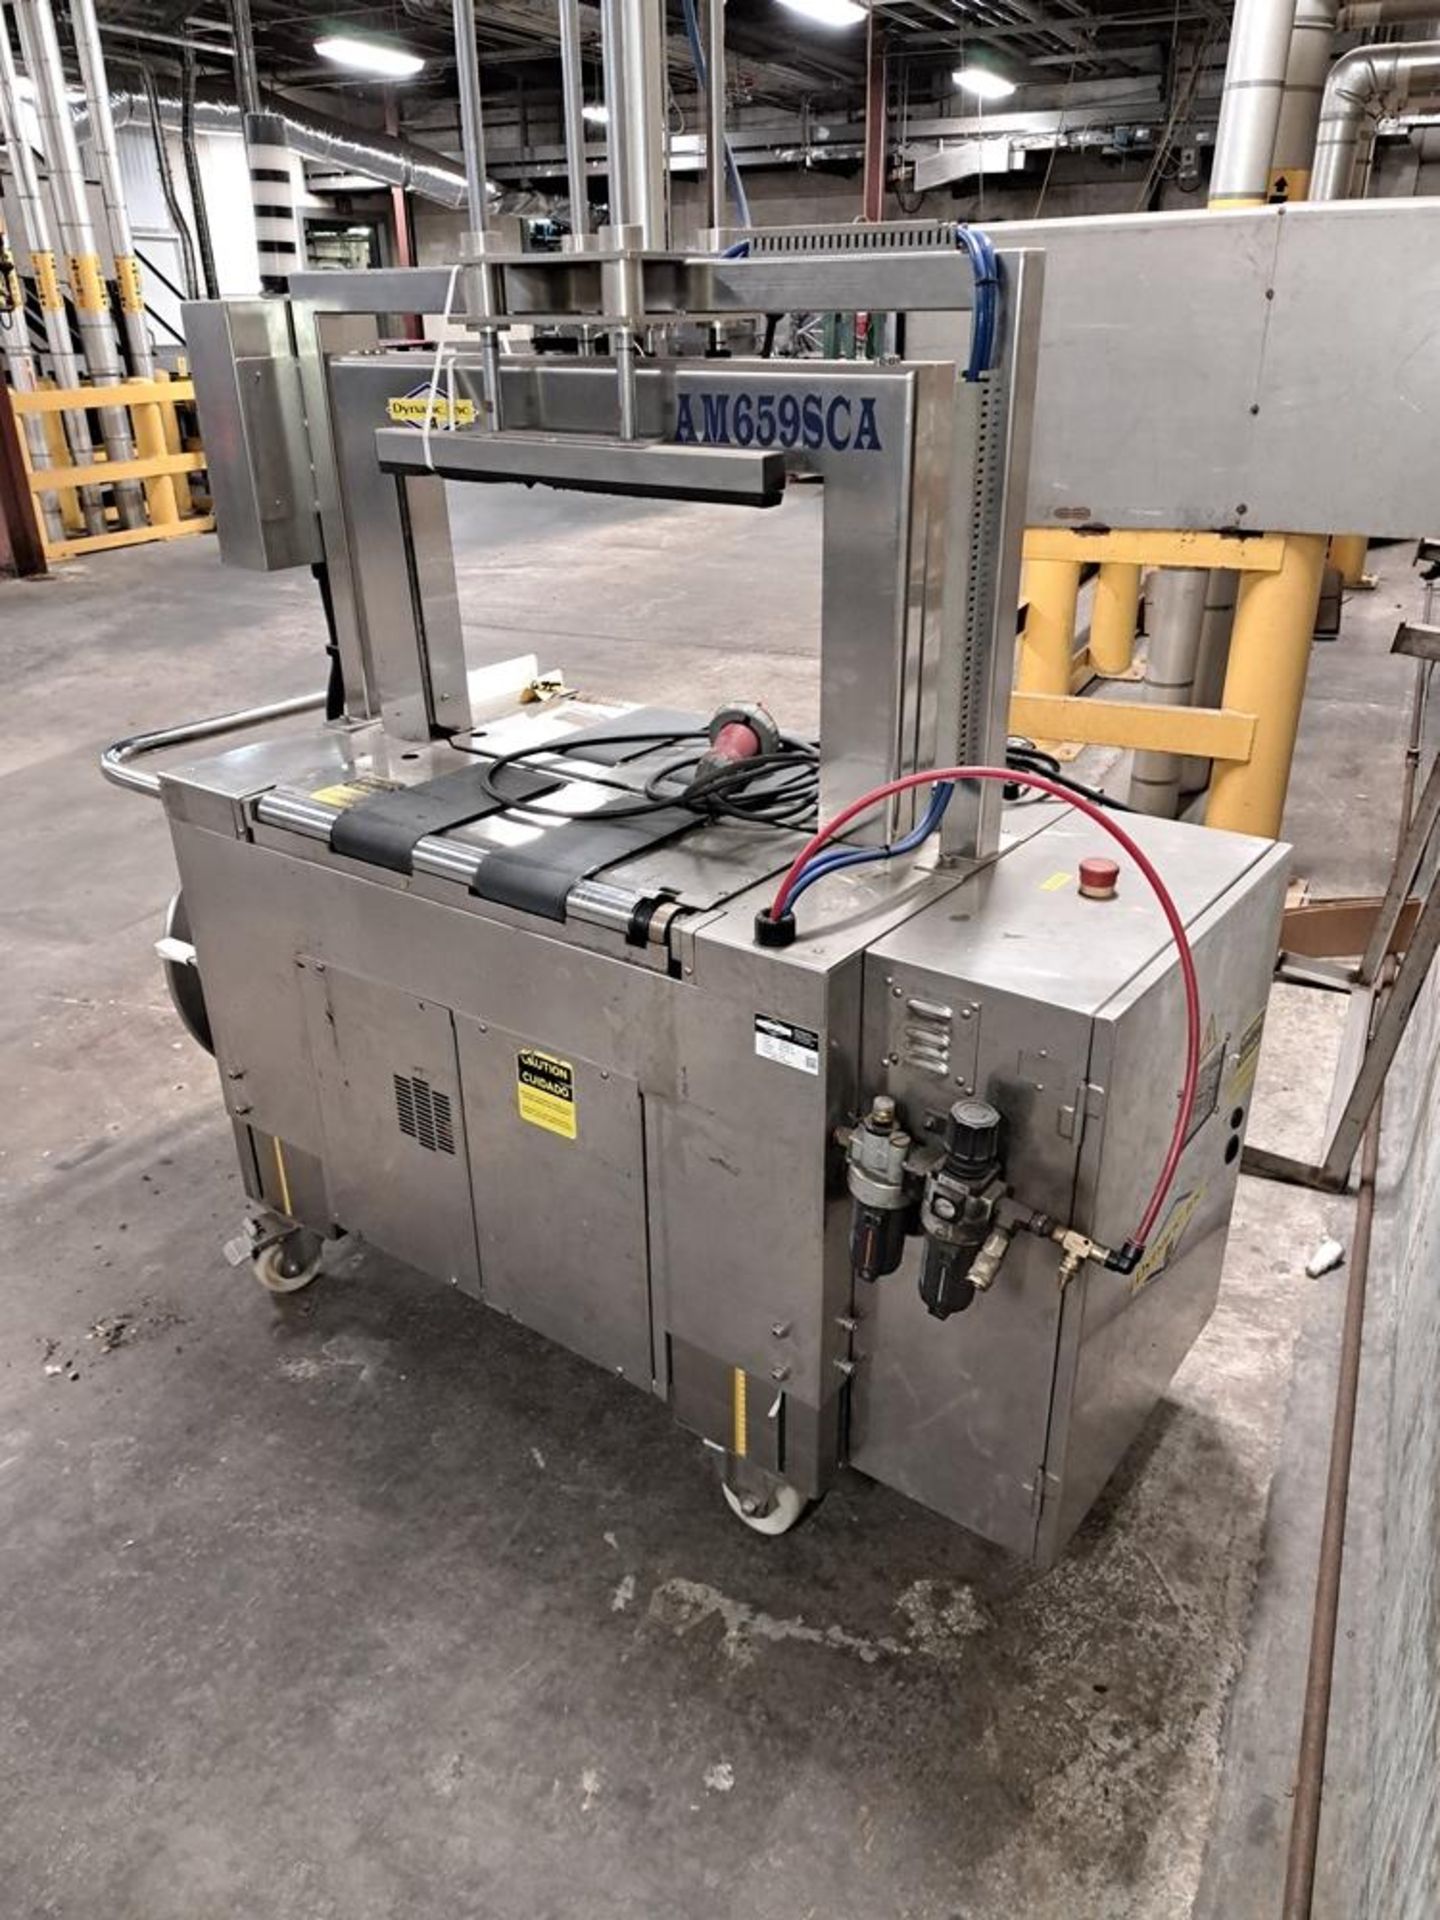 Dynaric Mdl. AM659SCA Stainless Steel Box Strapper, Ser. #201809014, 460 volts: Required Loading Fee - Image 2 of 3